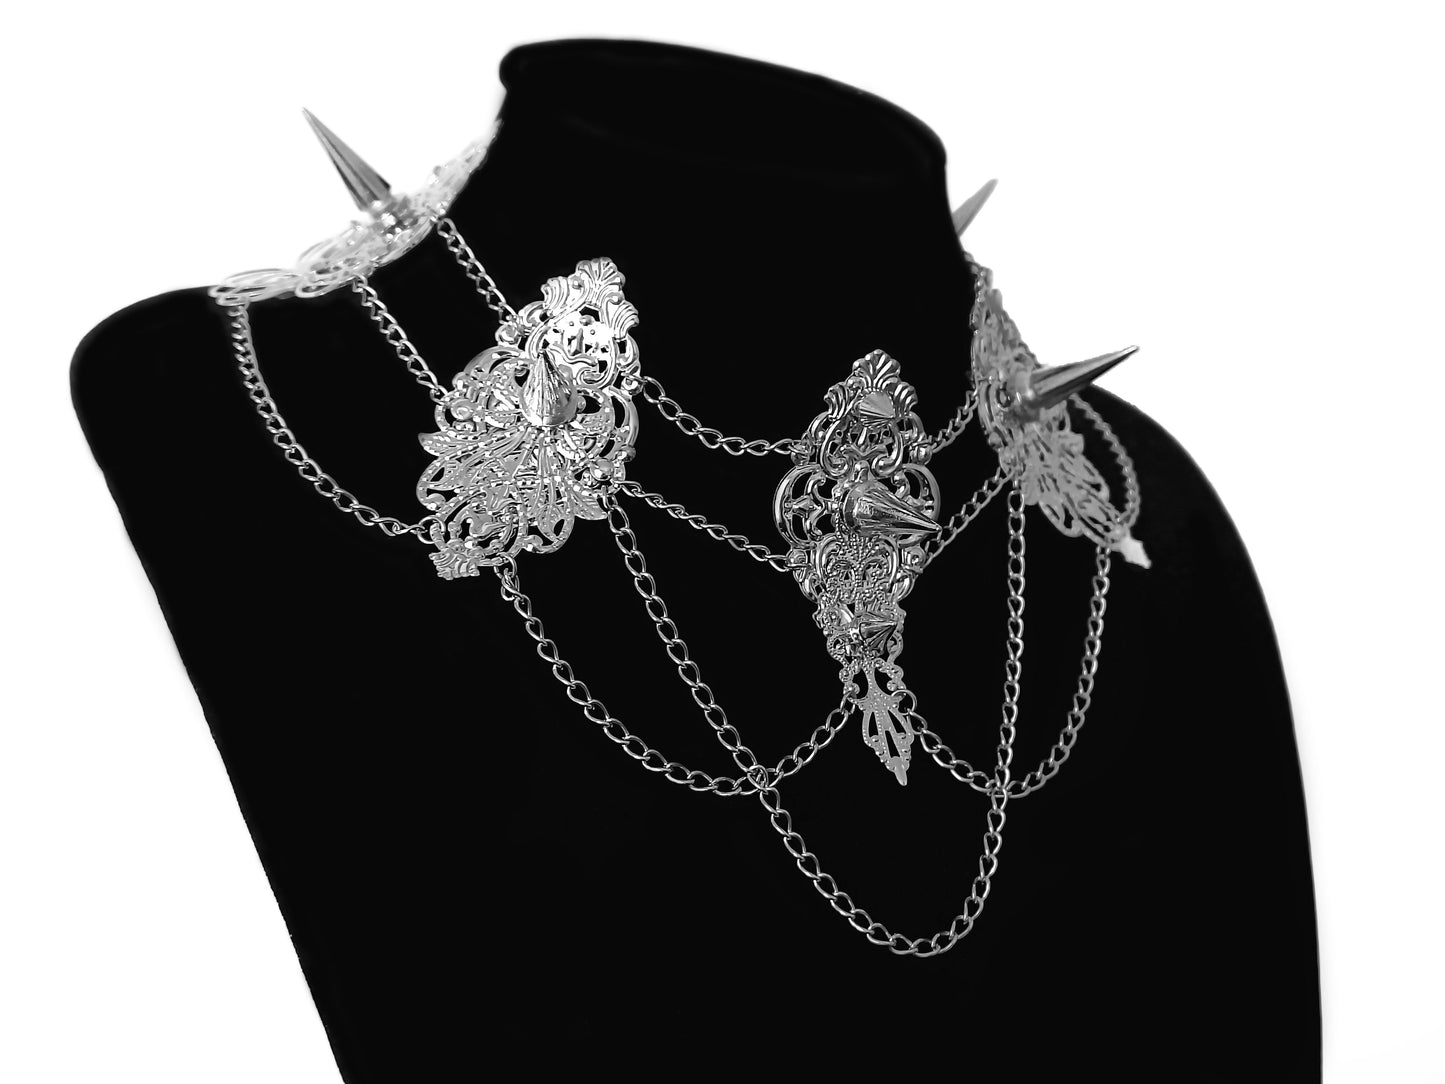 An intricate studded choker by Myril Jewels, featuring ornate silver filigree and sharp spikes, draped with delicate chains. This bold piece captures the essence of neo-gothic elegance, ideal for witchcore enthusiasts and a standout accessory for festival or rave attire.